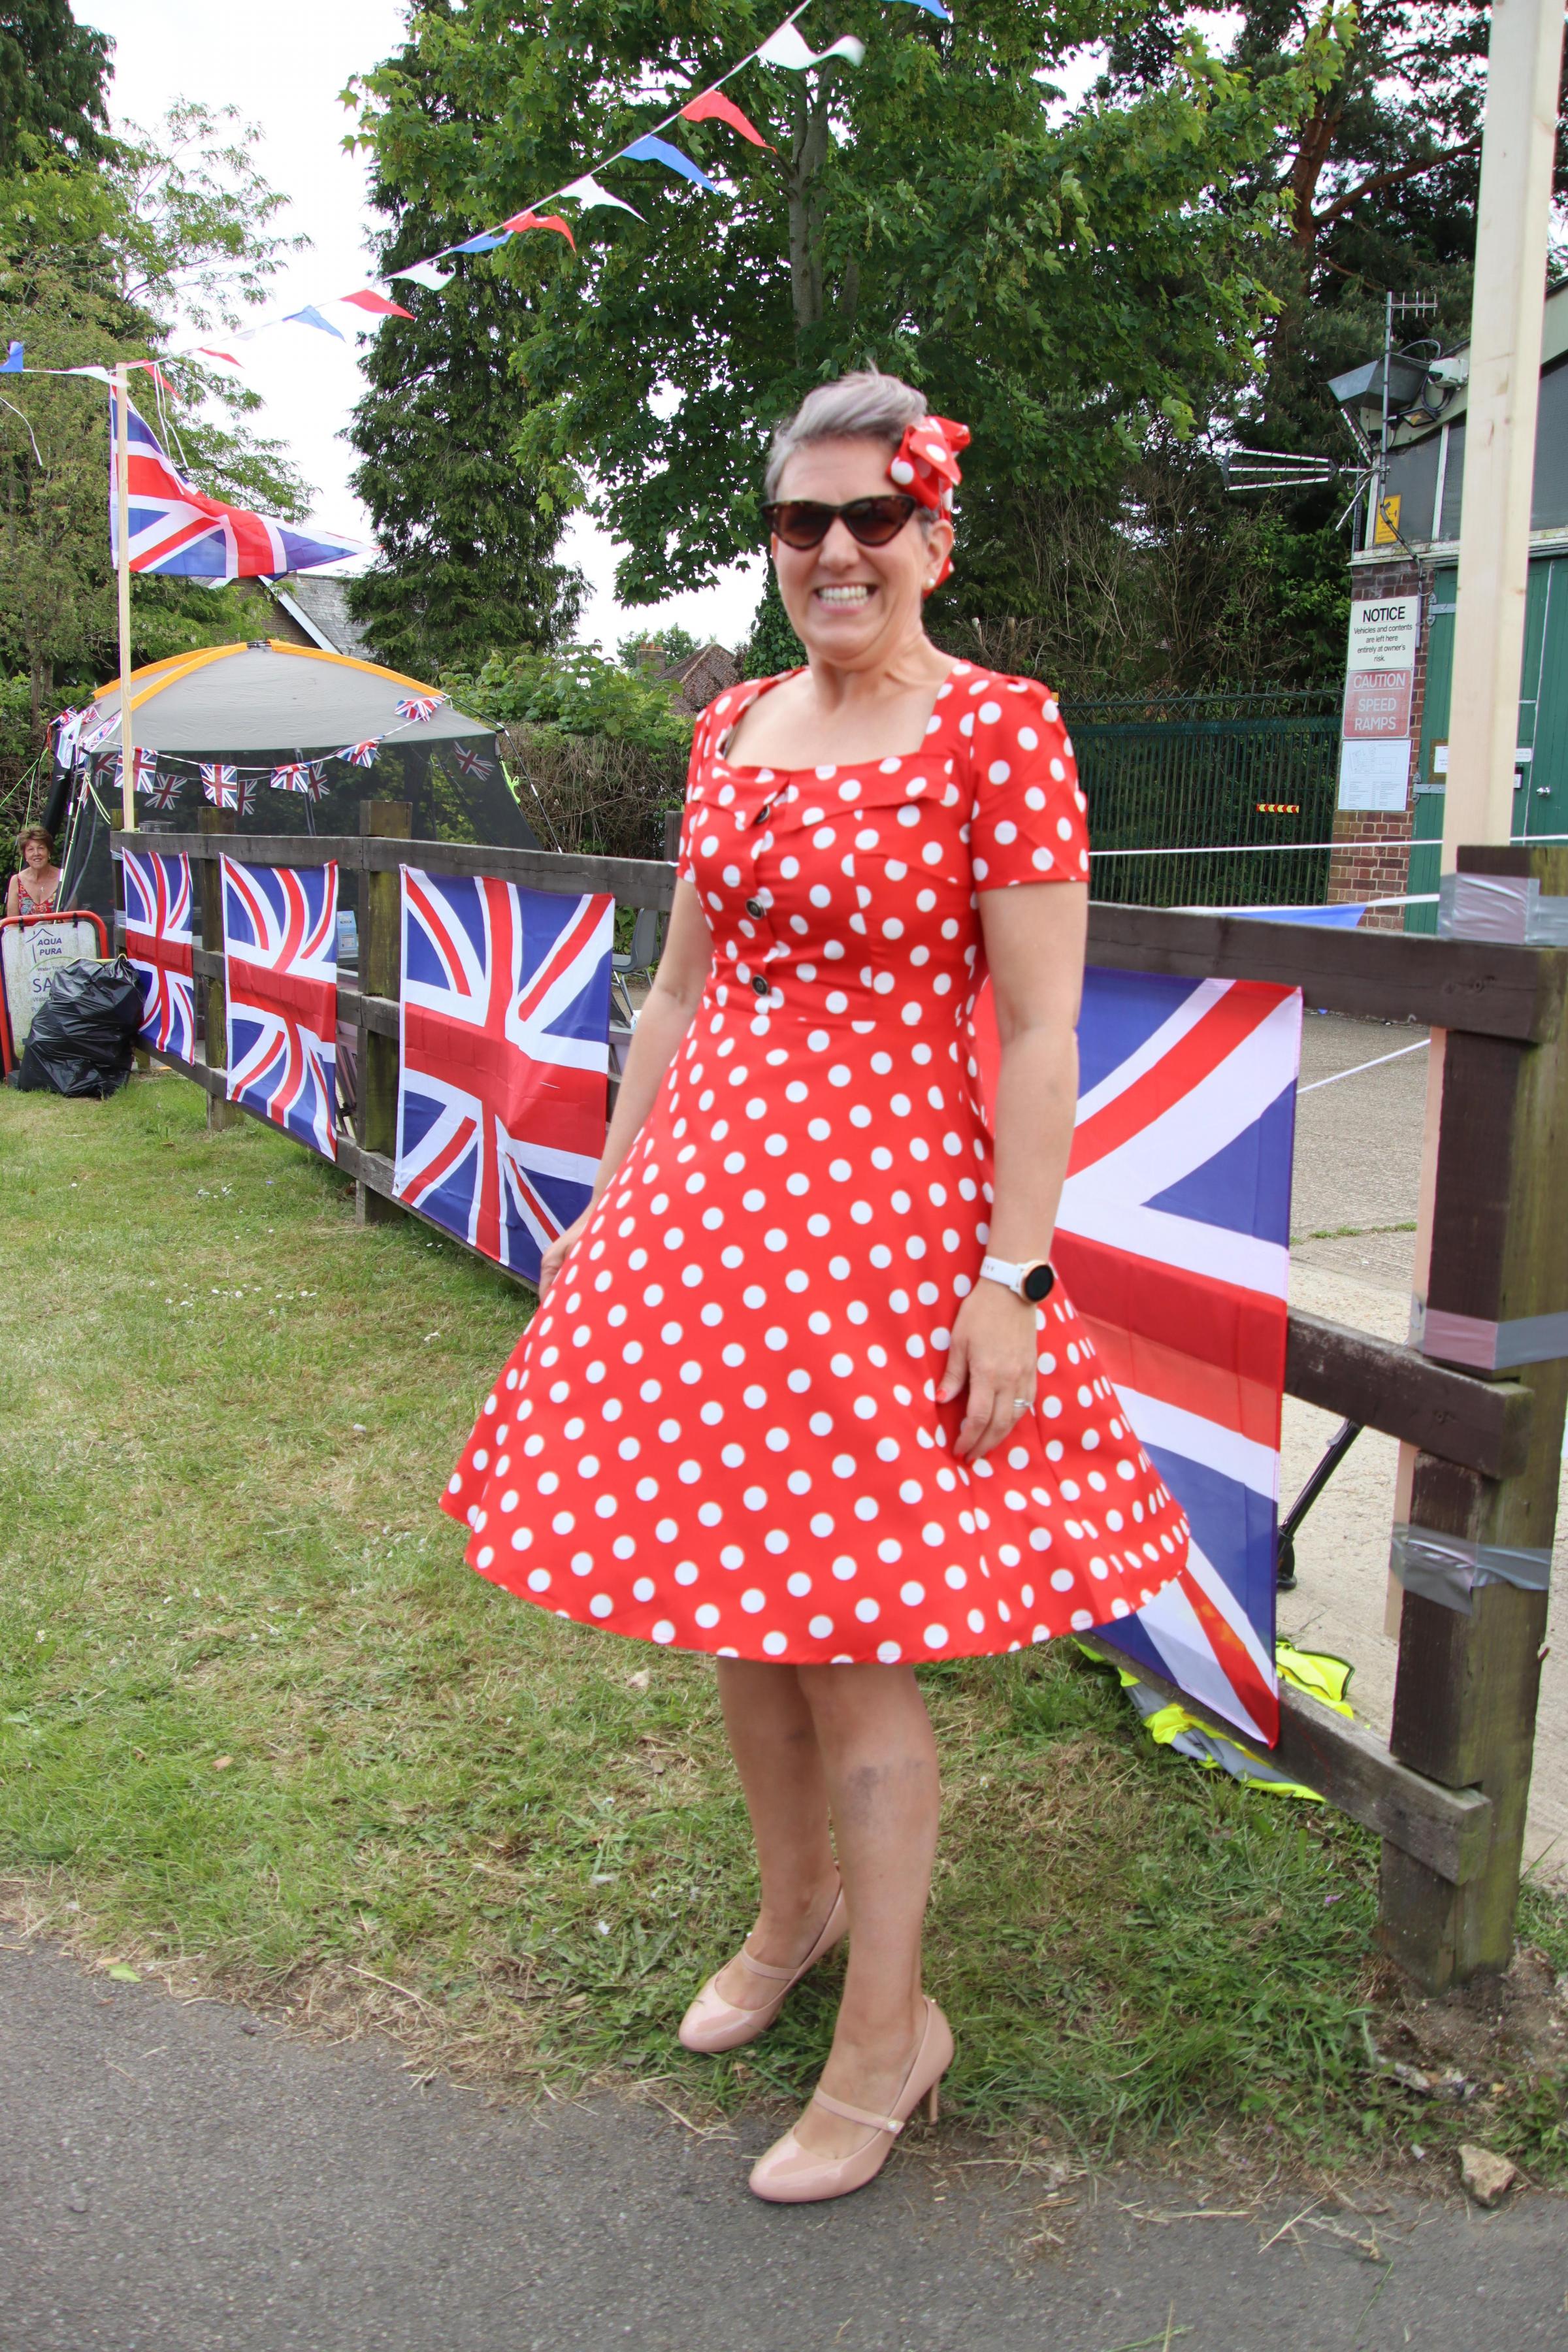 A dress for the occasion in Holmer Green